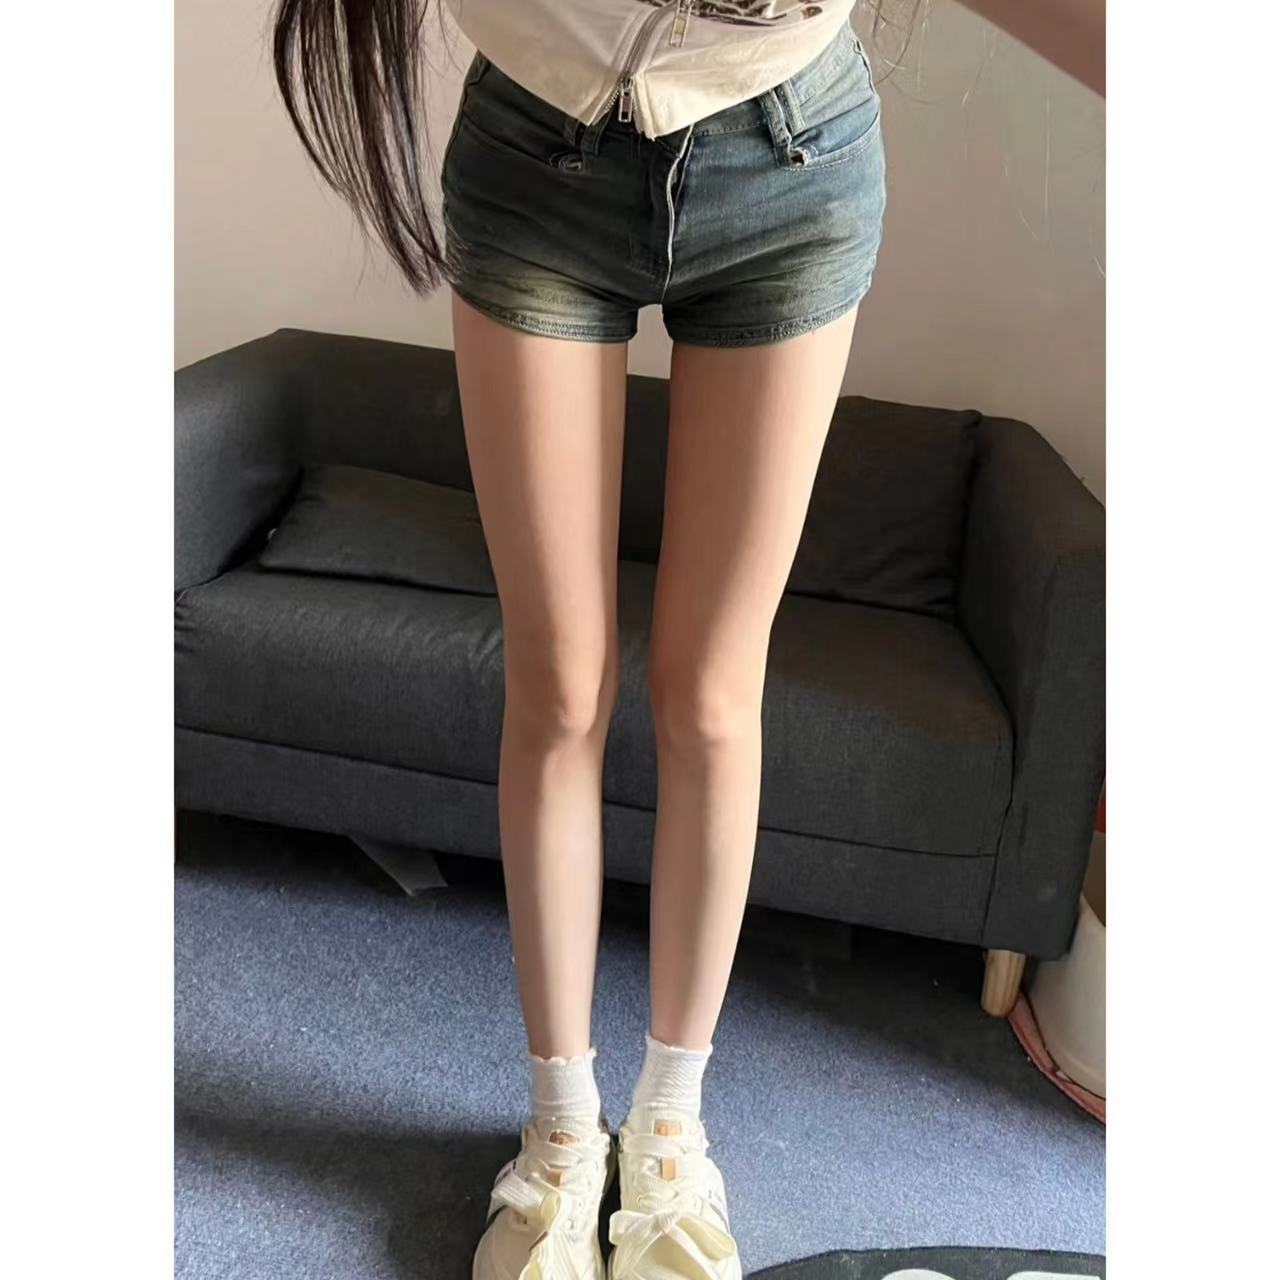 American style high waist hot girl denim shorts women's high waist washed elastic hot pants package buttocks show legs long straight tube old all-match